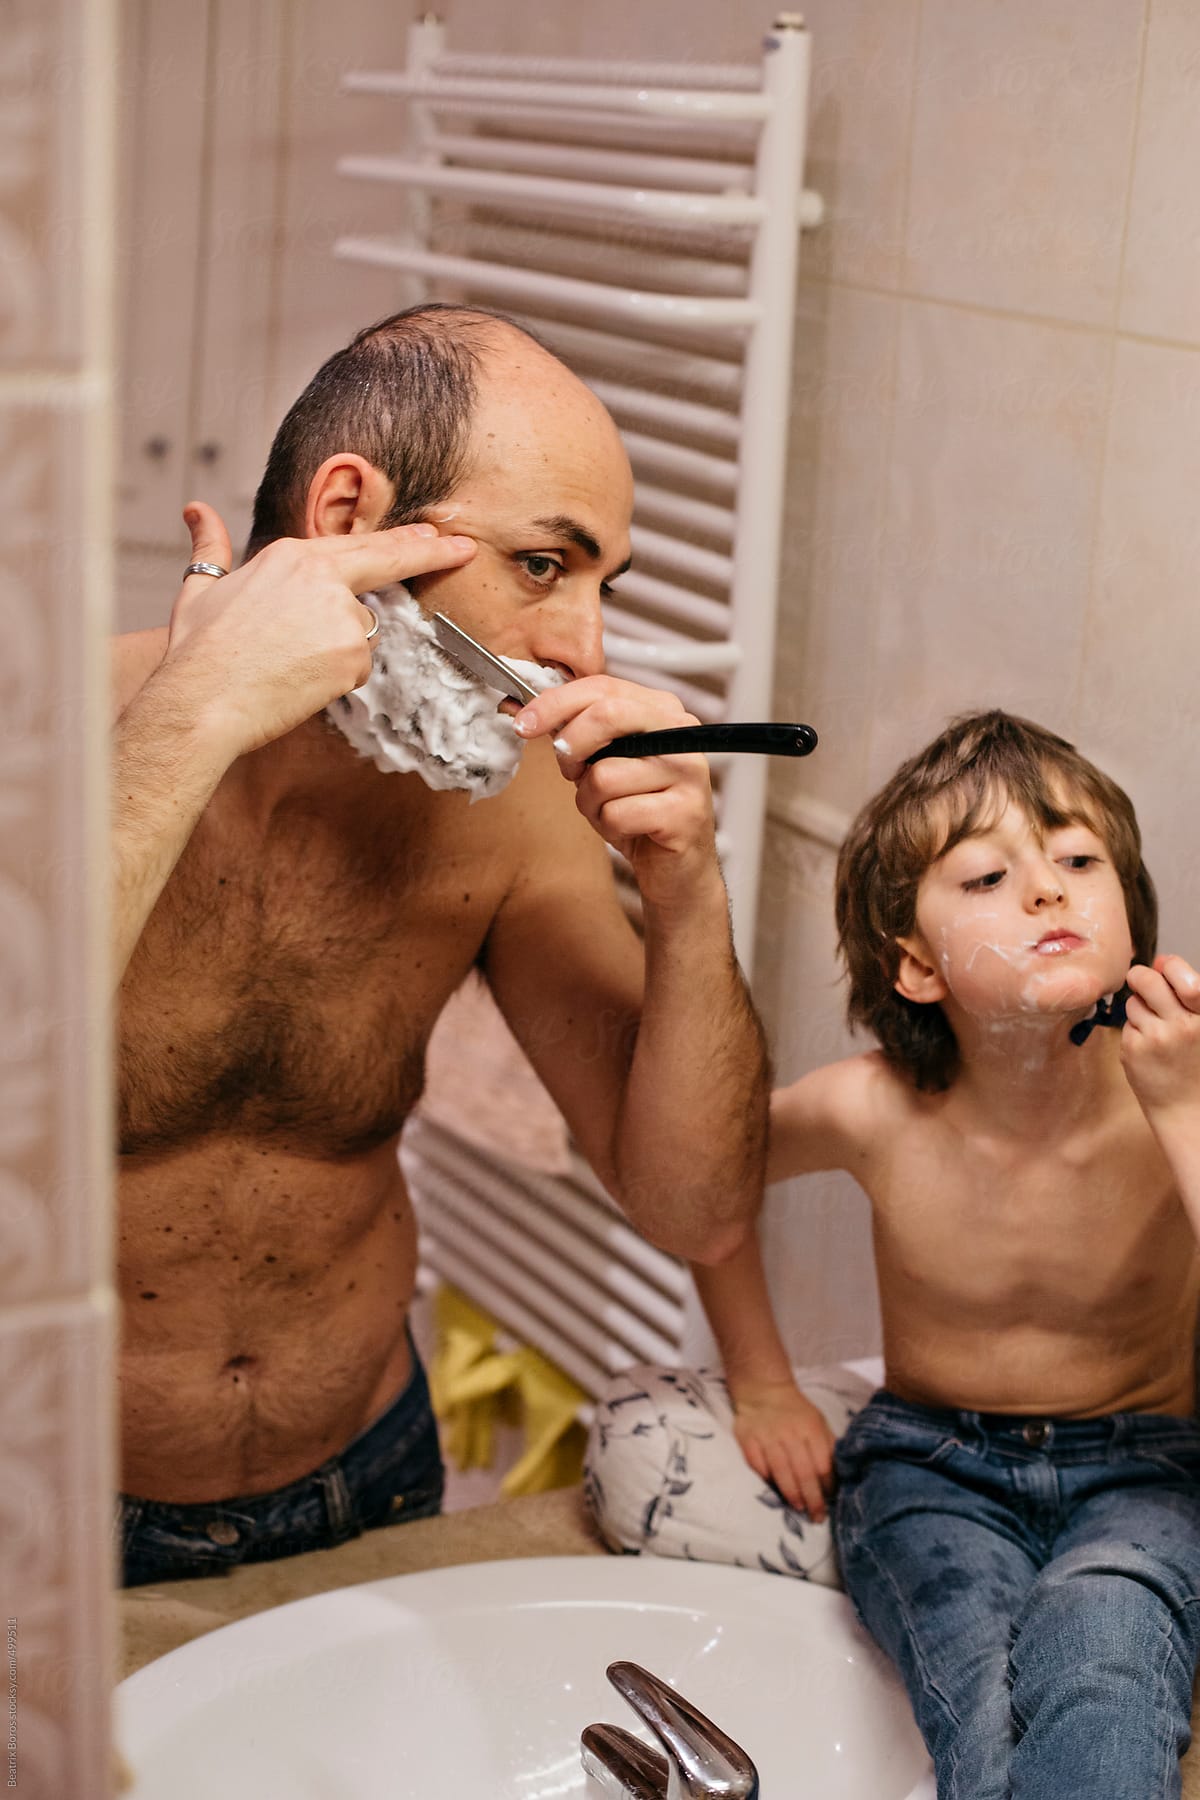 Father and 6 years old son carefully shaving their faces